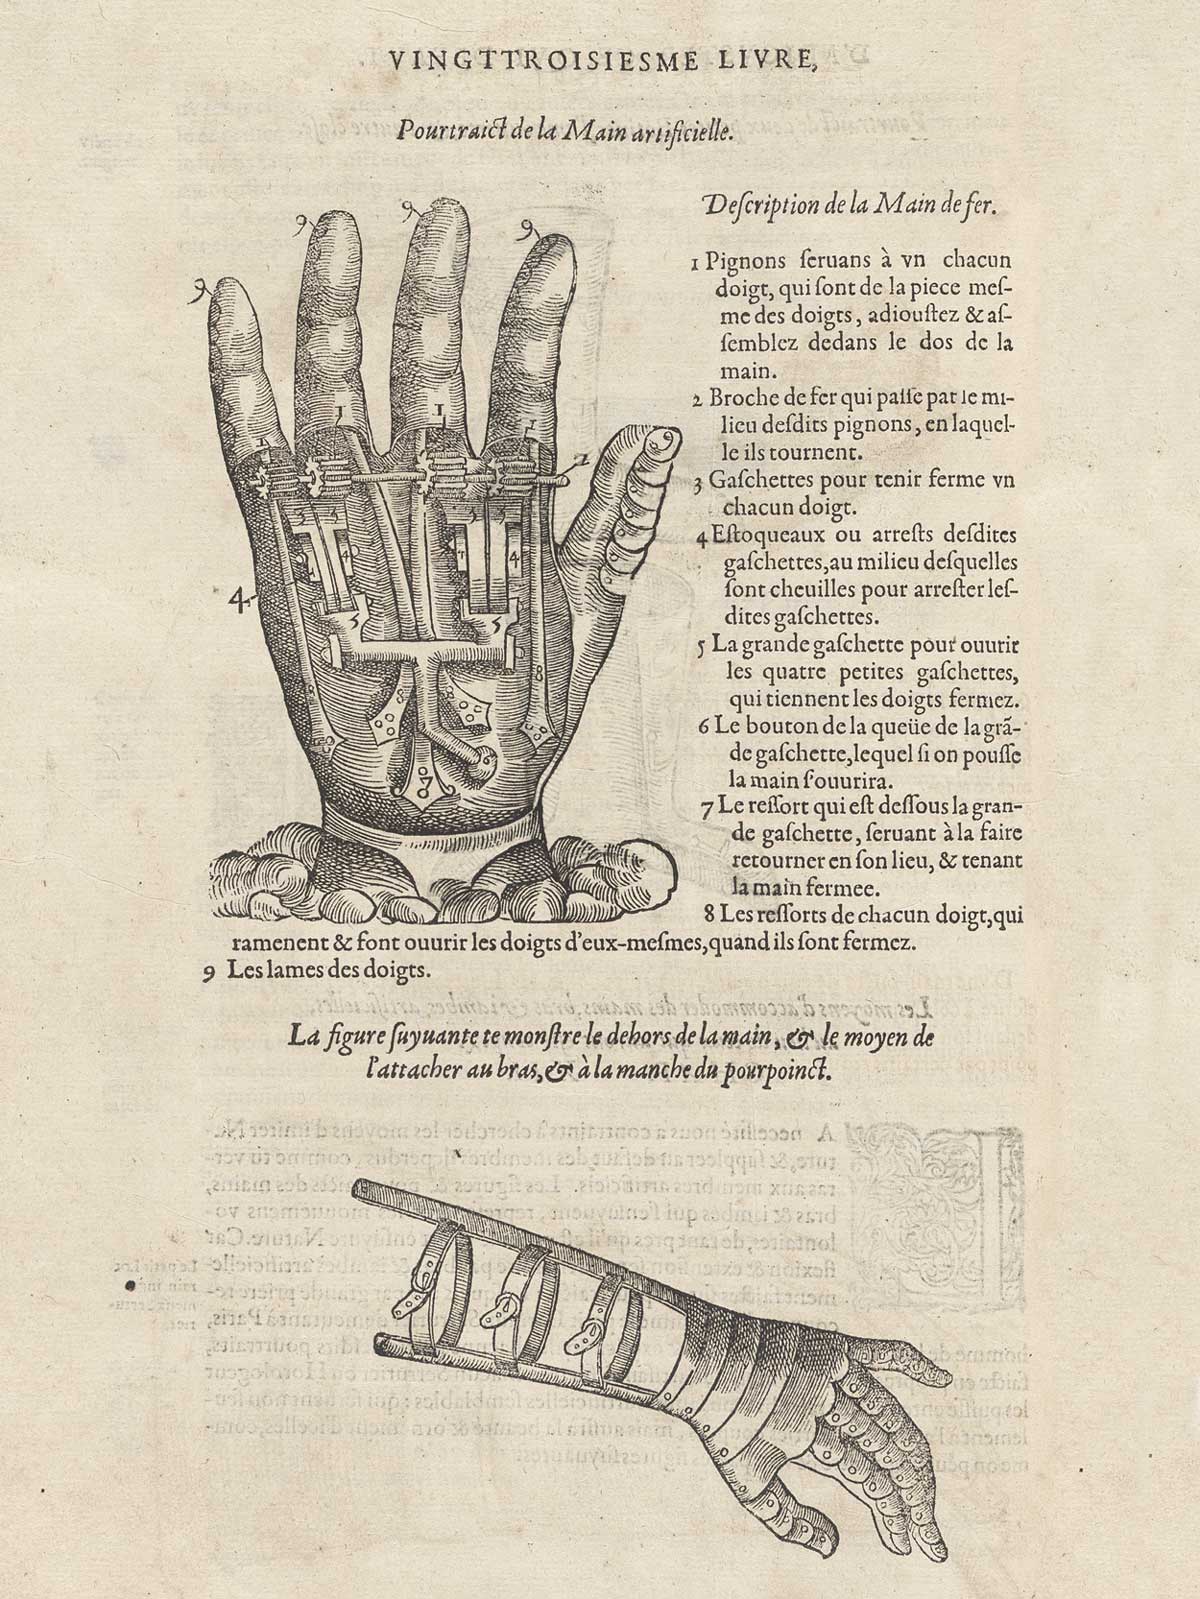 Woodcut of two prosthetic hands, the one on the top viewed in the palm, the lower one viewed looking down on the wrist, with typeset text in French to the right and between the two hands, from Ambroise Paré’s Oeuvres, NLM Call no.: WZ 240 P227 1585.